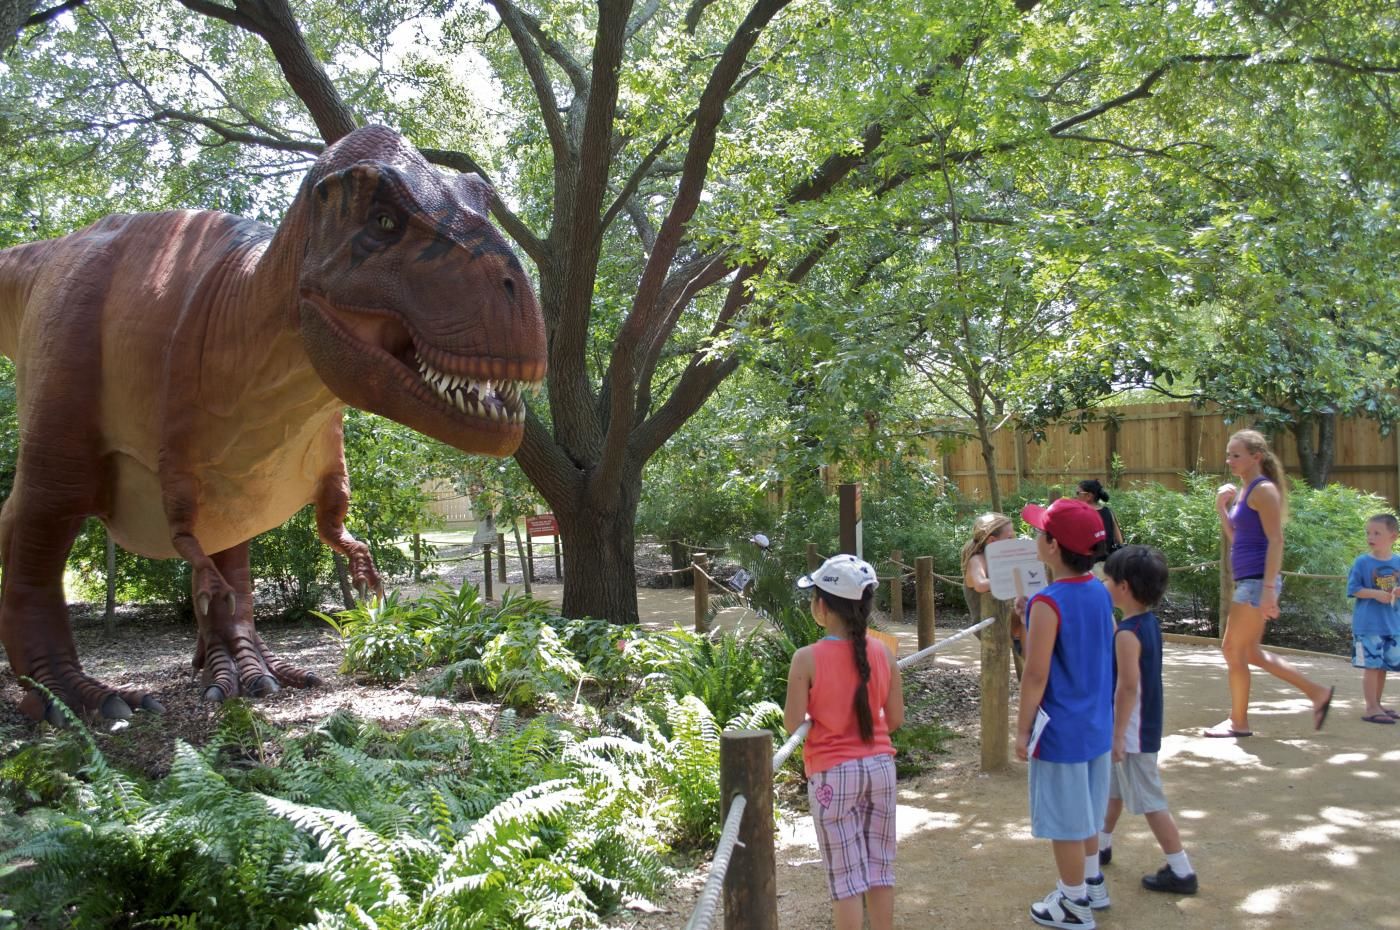 <p>The dinosaurs at the Smithsonian&#8217;s National Zoo leave after Monday, Sept. 2. <a href="https://nationalzoo.si.edu/visit/dino-summer" target="_blank" rel="noopener">Learn more here</a>.</p>
